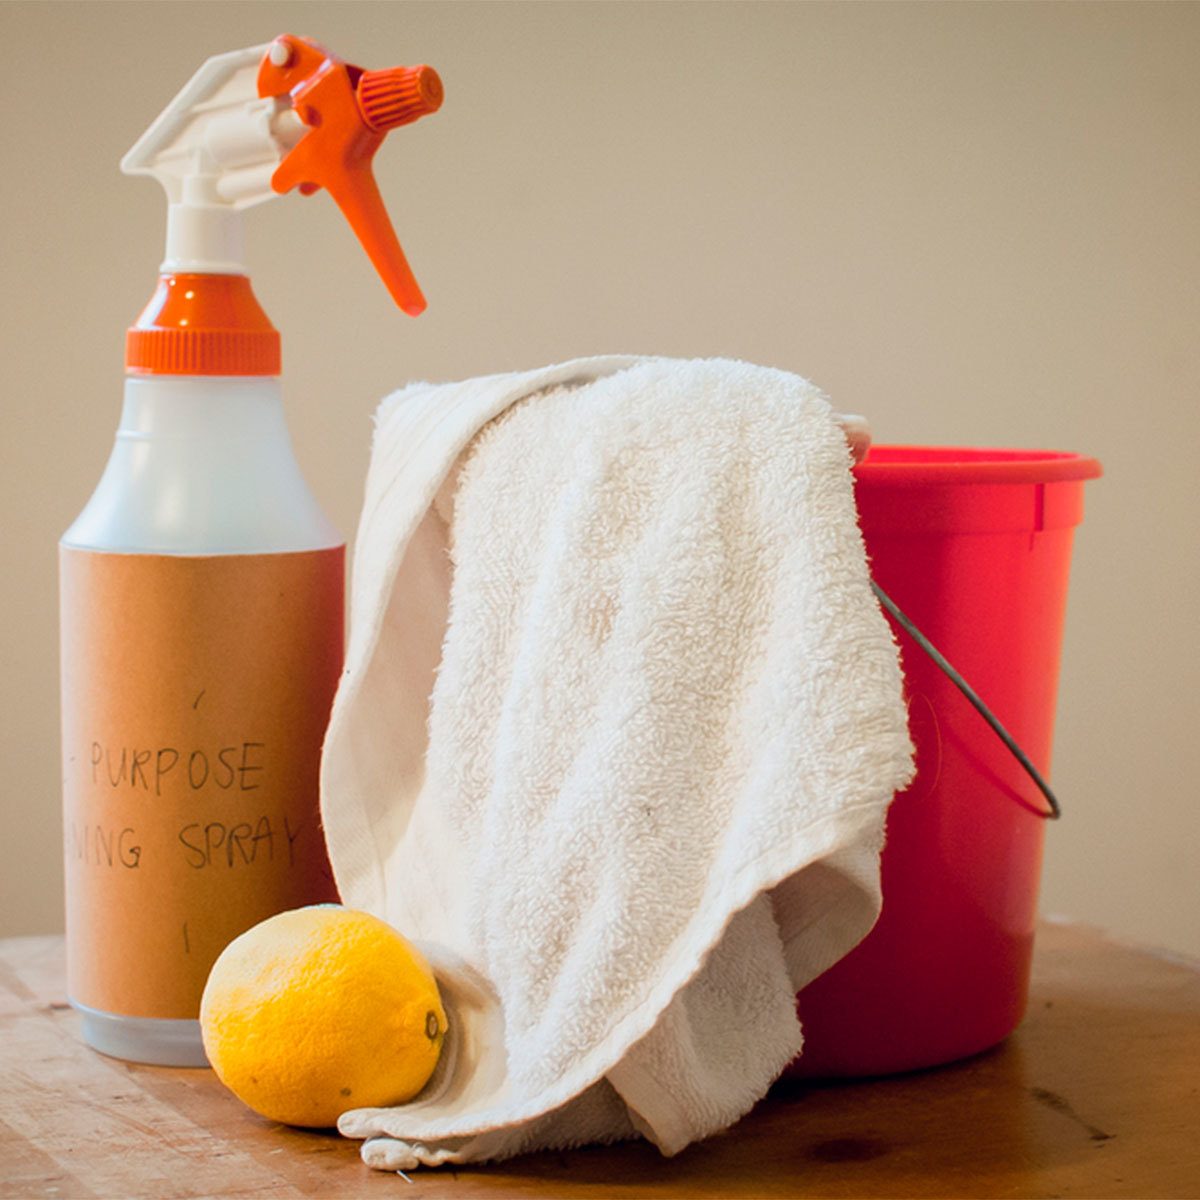 greener household cleaners  Cleaners homemade, Homemade cleaning products,  Diy cleaning products